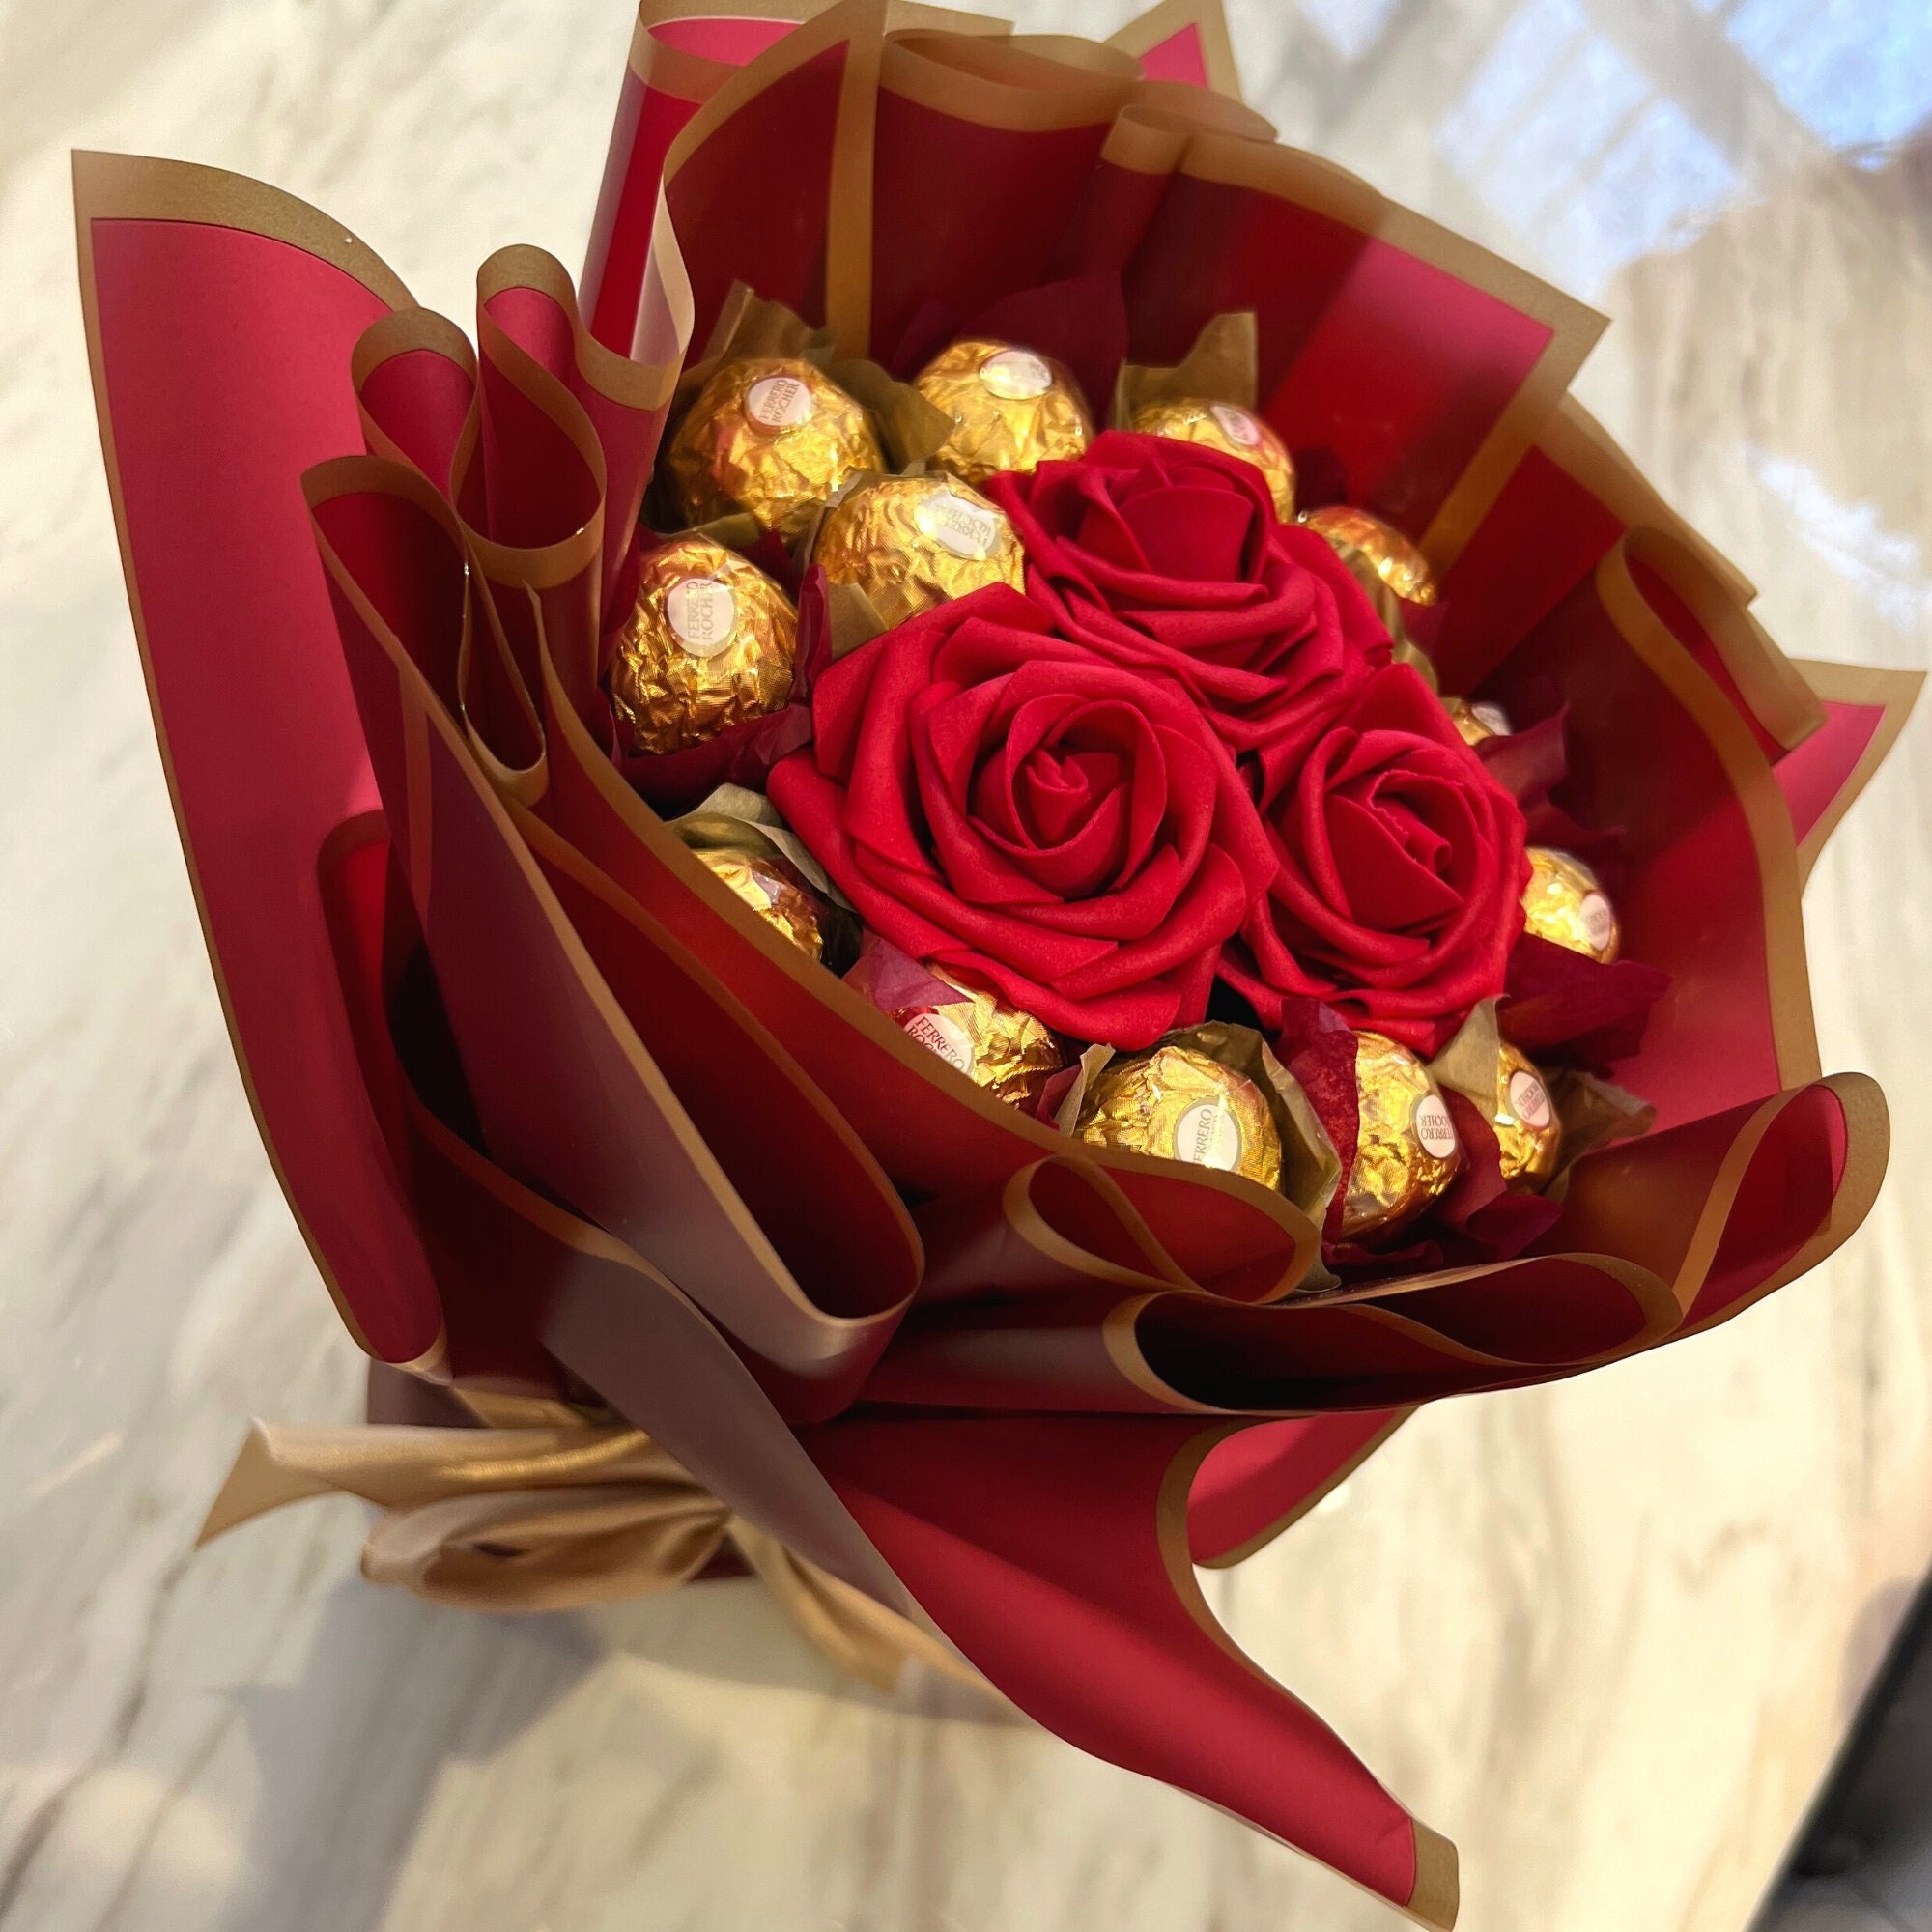 Rolled money bouquet with flowers and Lindor chocolate